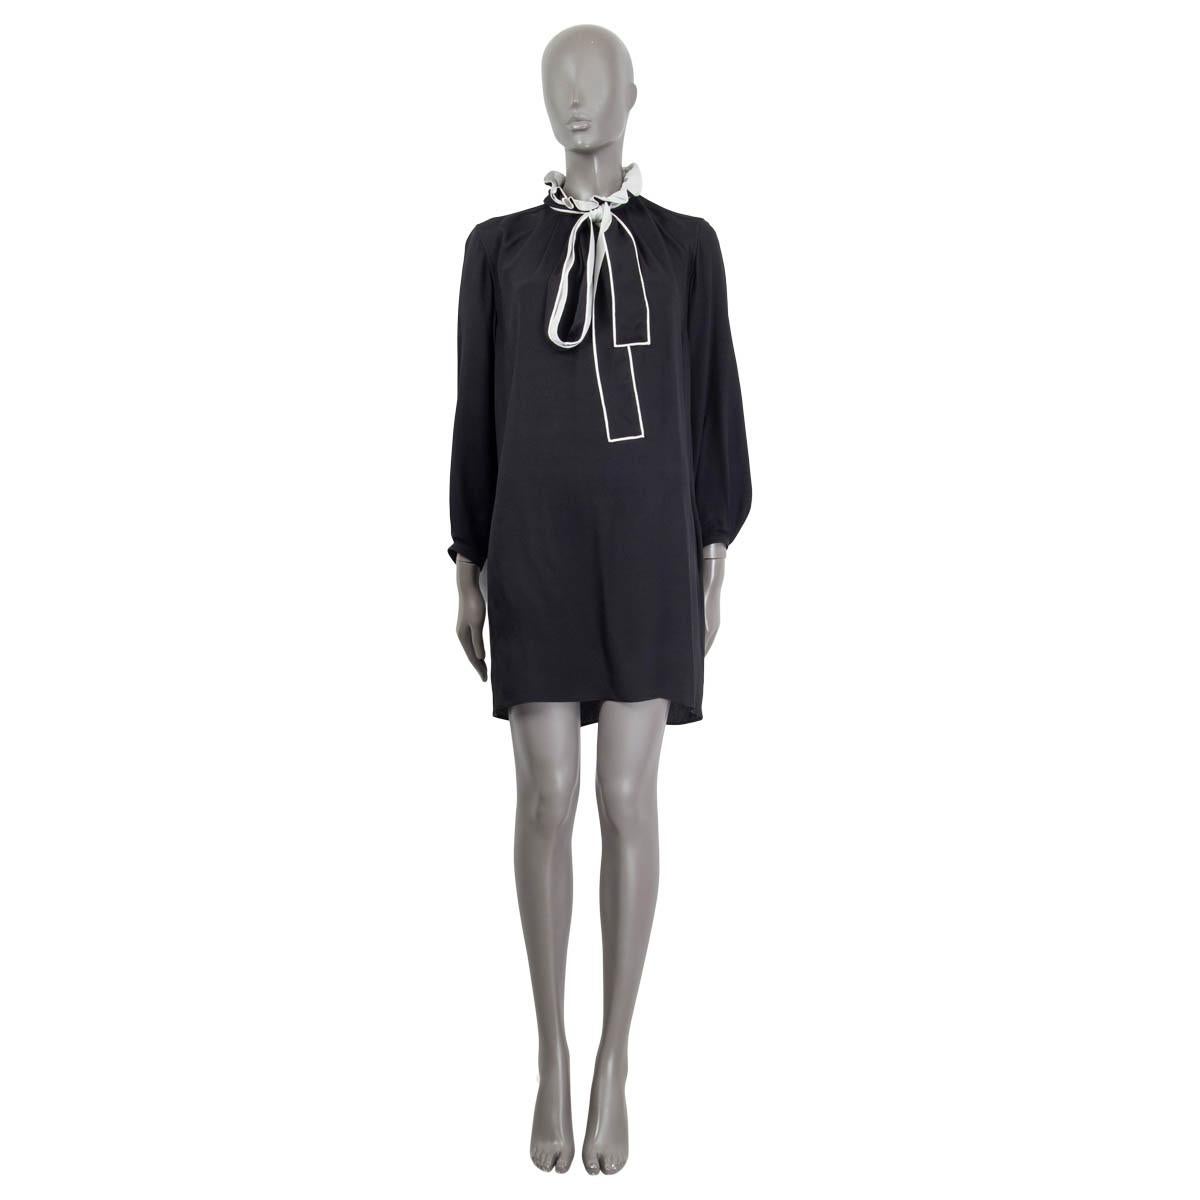 100% authentic Chloé long sleeve dress in black and white acetate (55%) and silk (45%). Features buttoned cuffs, two slit pockets and a self-tie bow. Opens with a concealed zipper at the back. Unlined. Has been worn and is in excellent